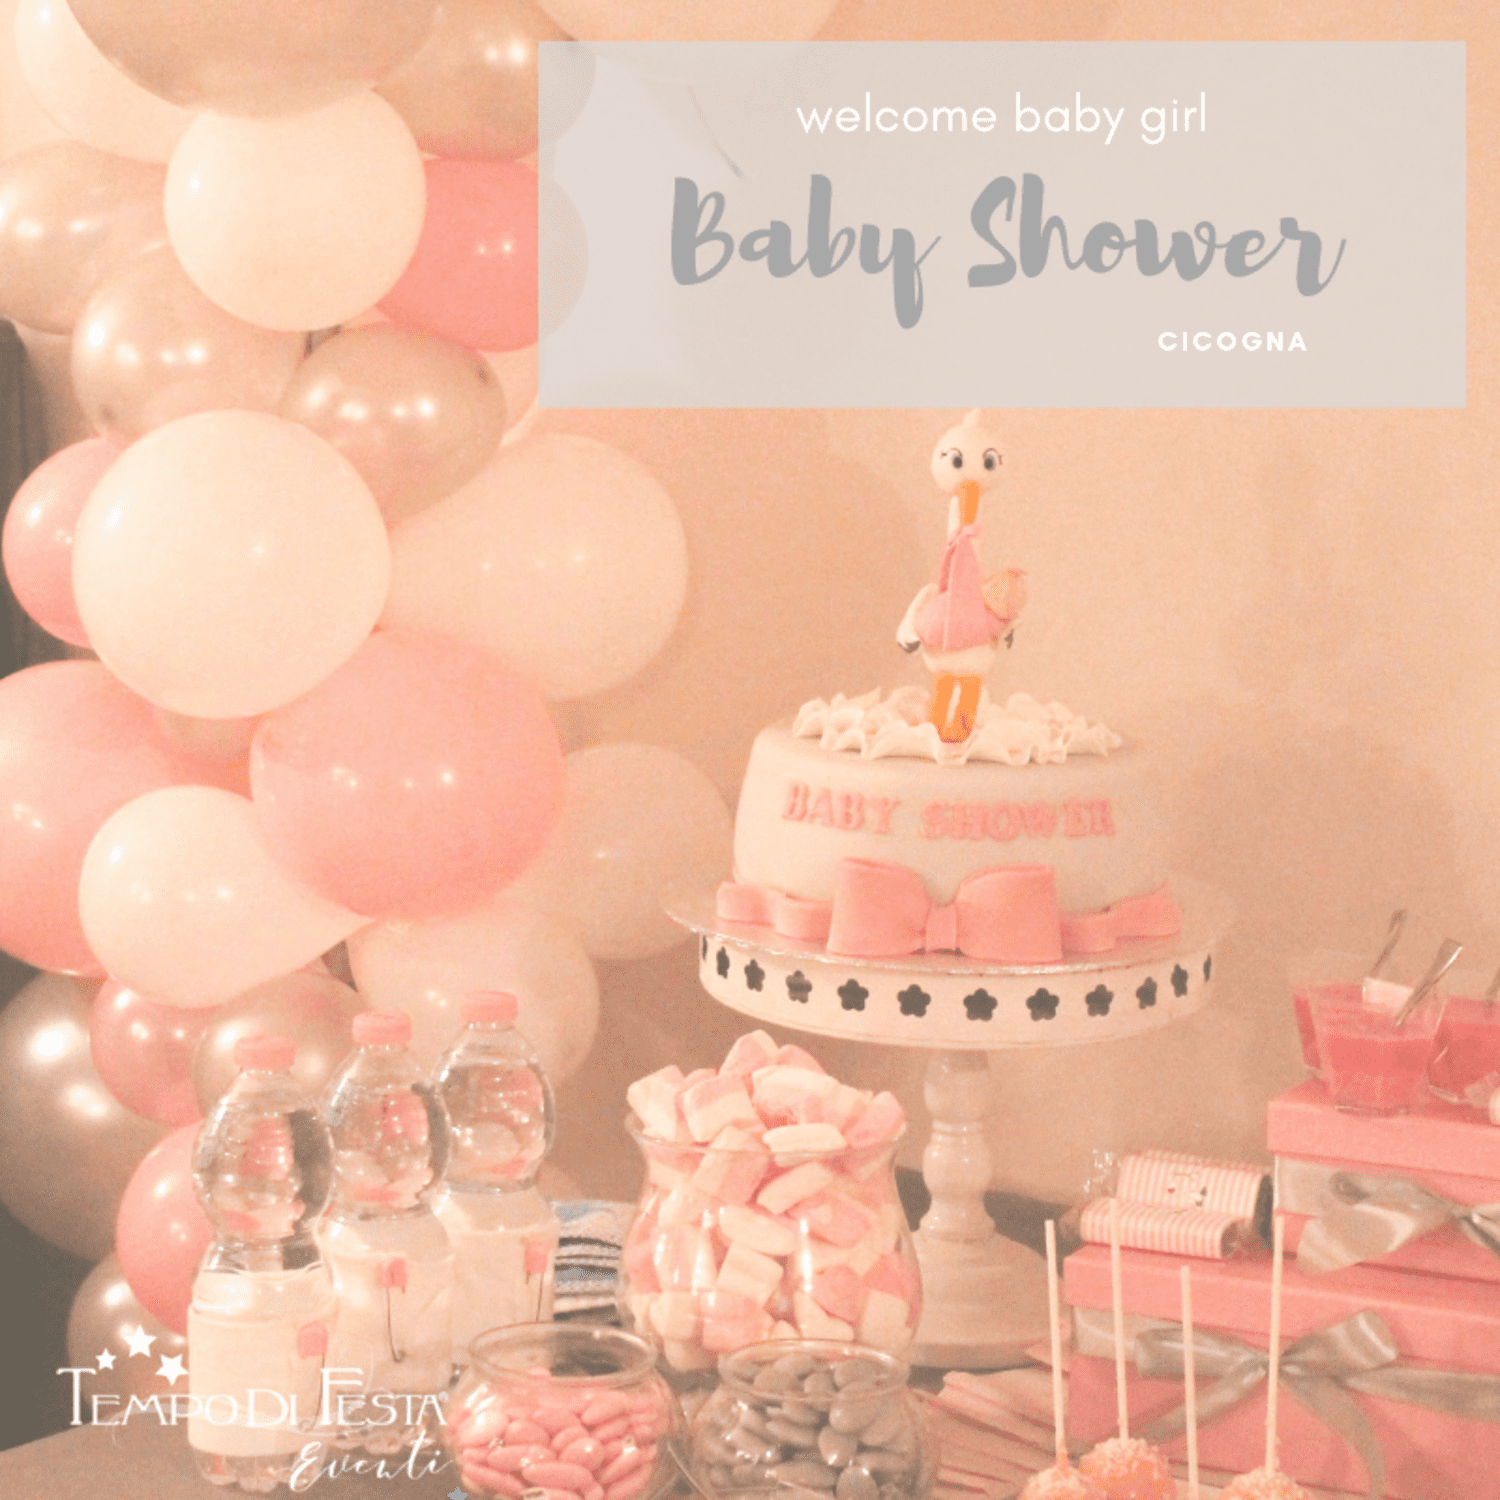 Baby-Shower-cicogna